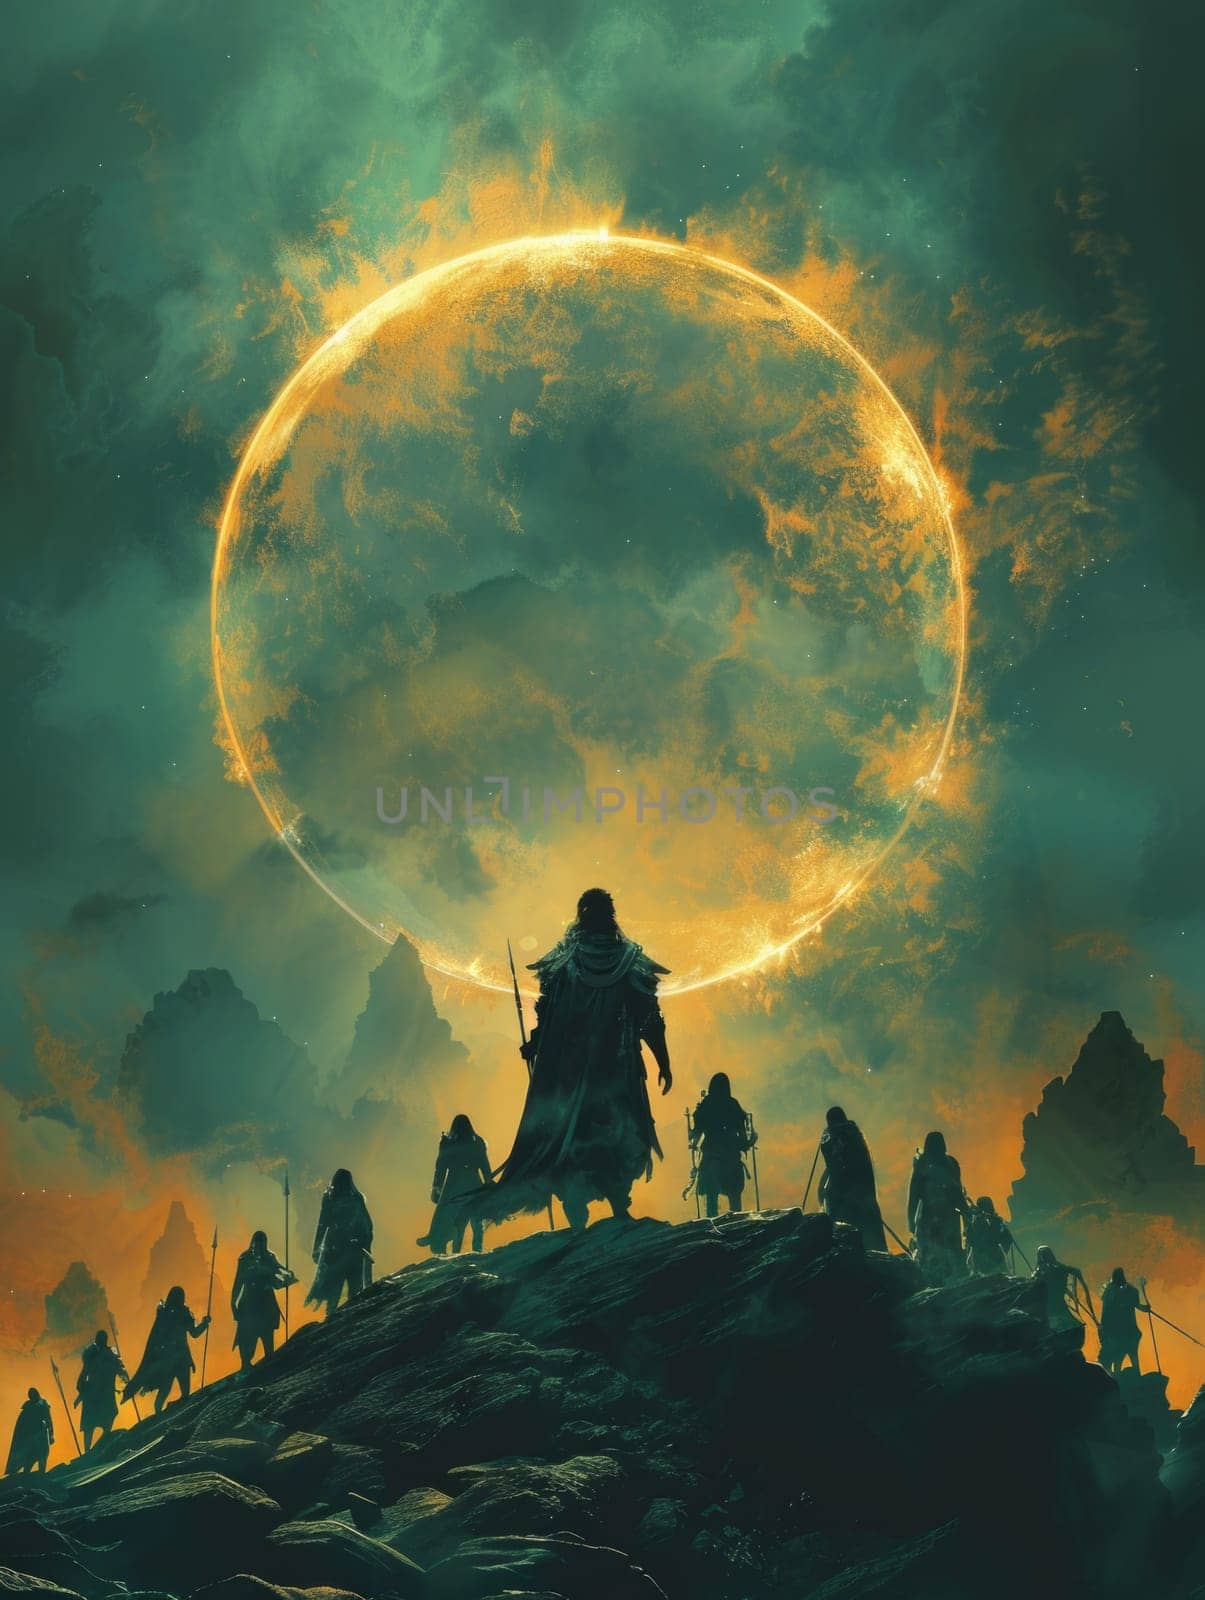 The Lord of the Rings Movie Poster by but_photo